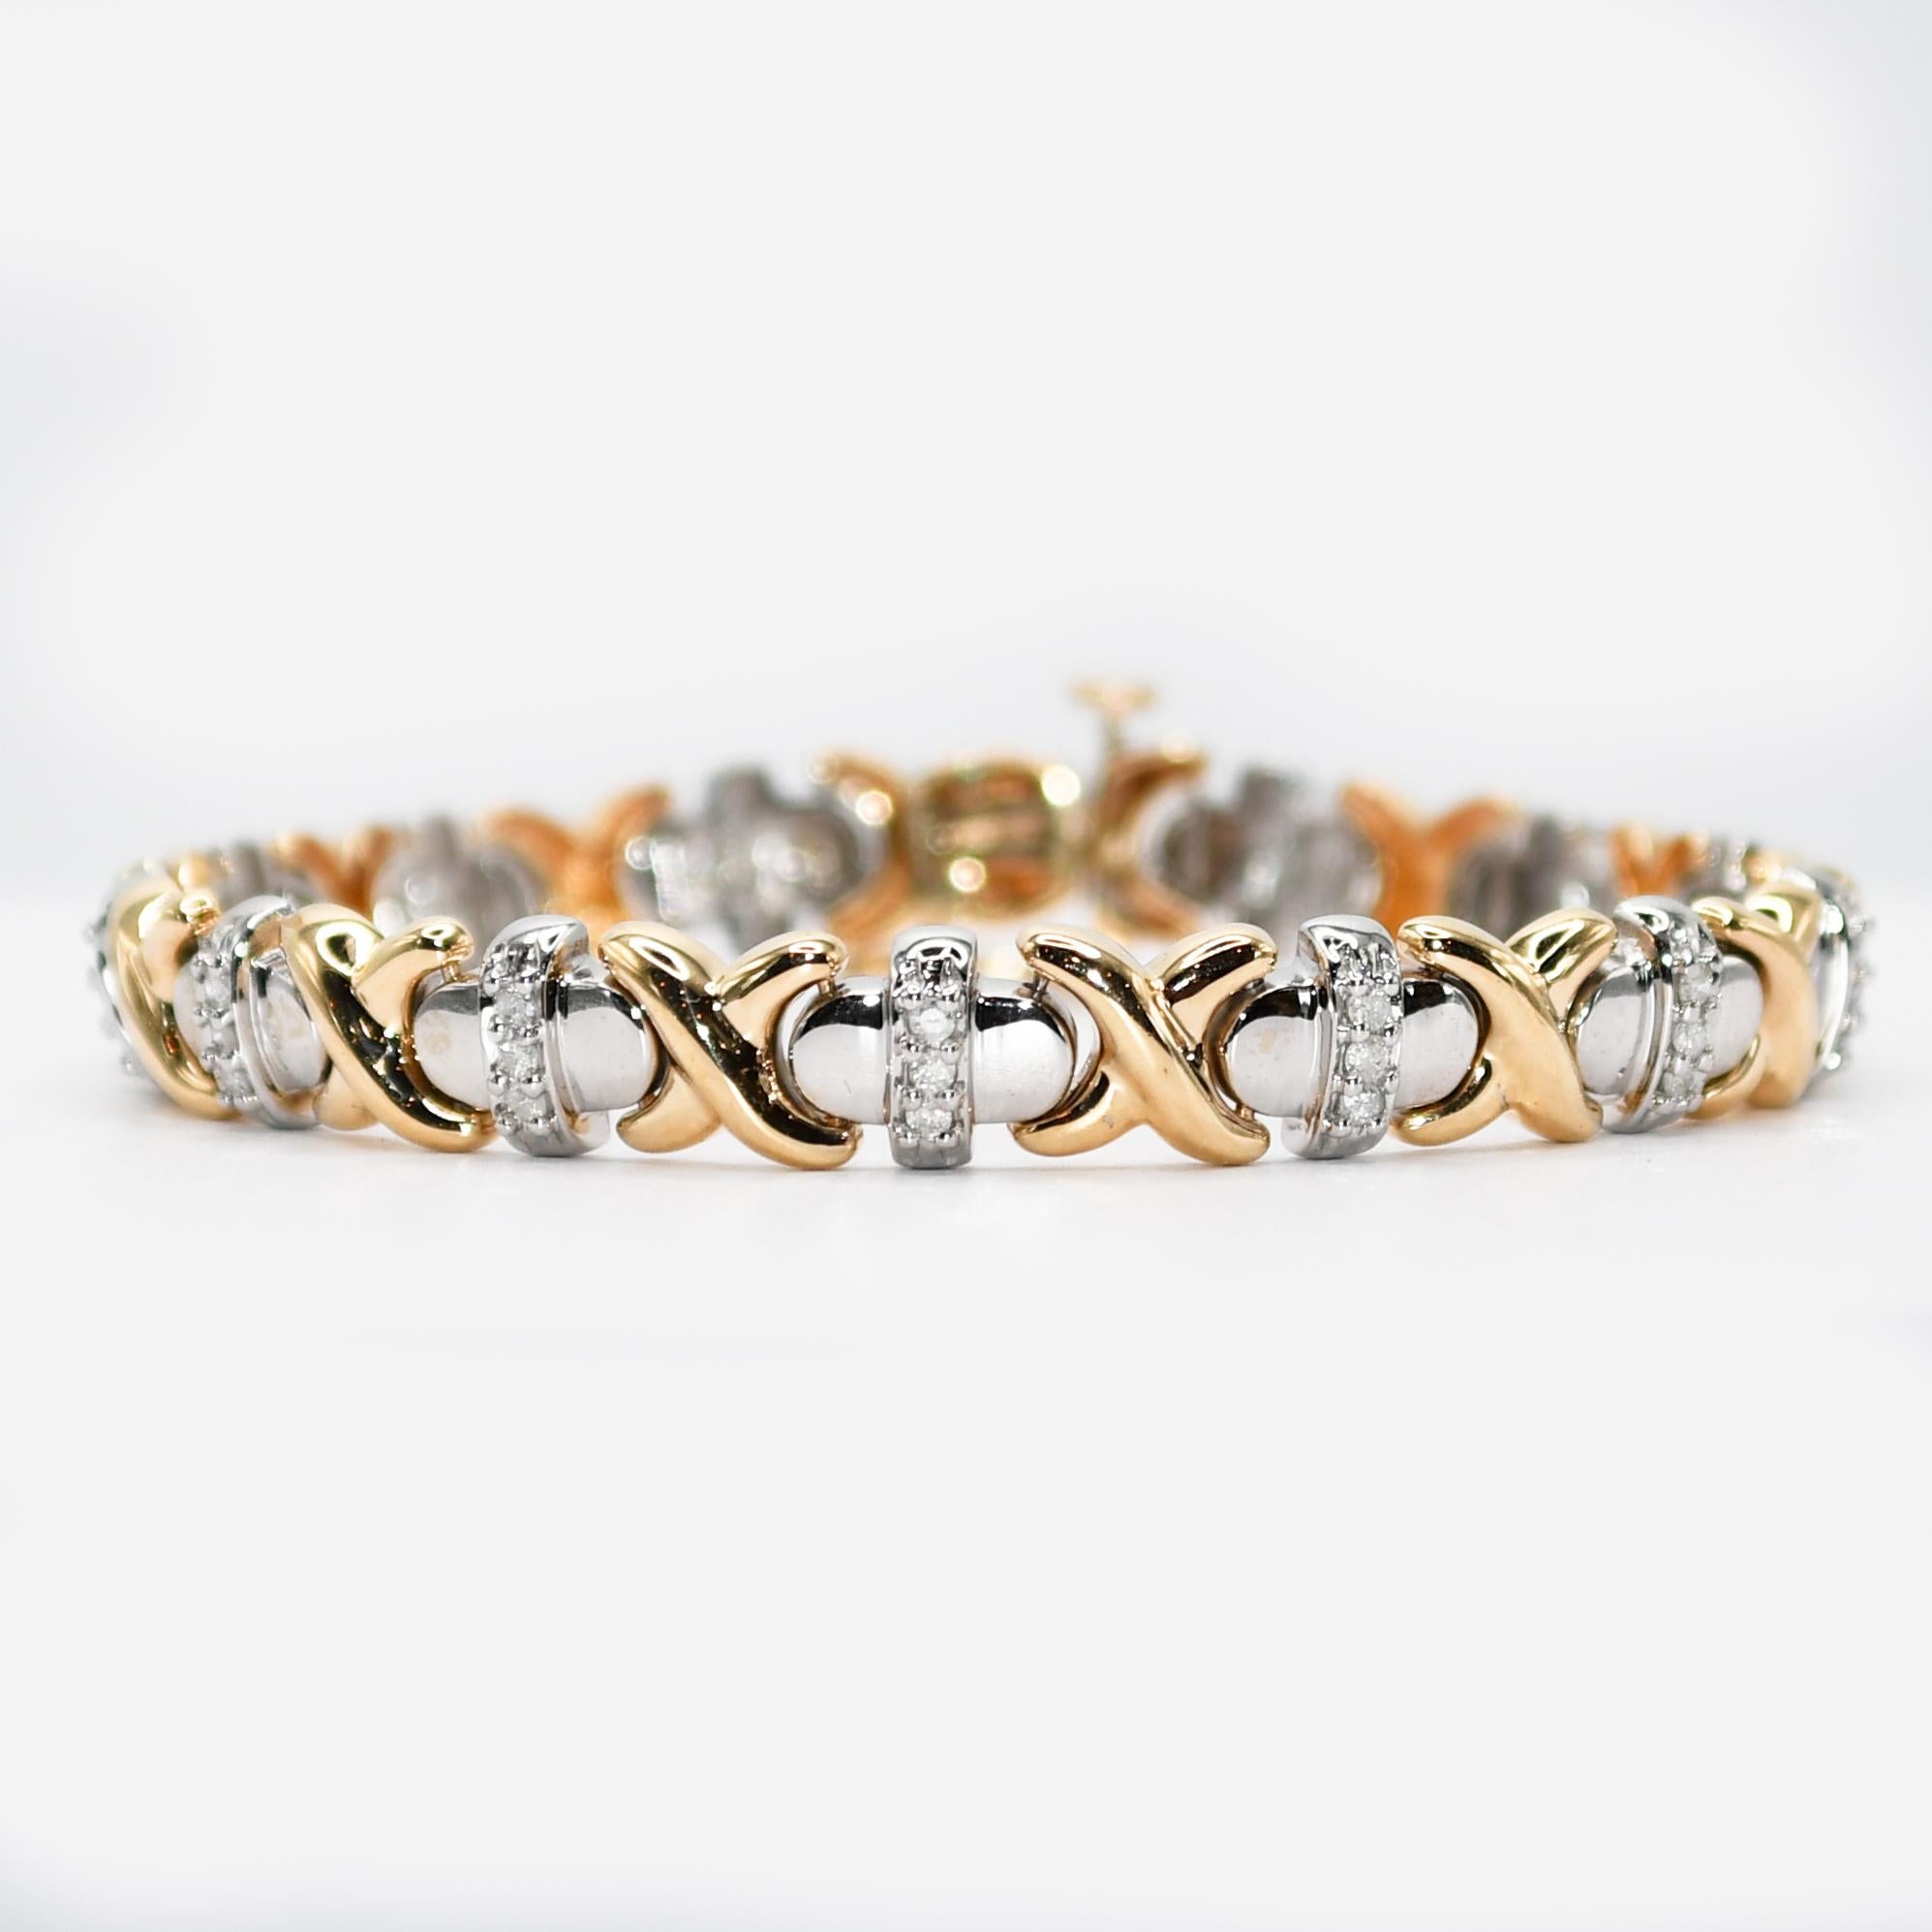 10K Yellow Gold 2 Tone Diamond Bracelet, 1.00tdw, 18.4g
Ladies 14k 2-tone diamond bracelet.
The safety clasp is stamped 14k and the rest tests 14k.
Weighs 18.4 grams.
The diamonds are round brilliant cuts, approximately 1.00 total carats, i to j